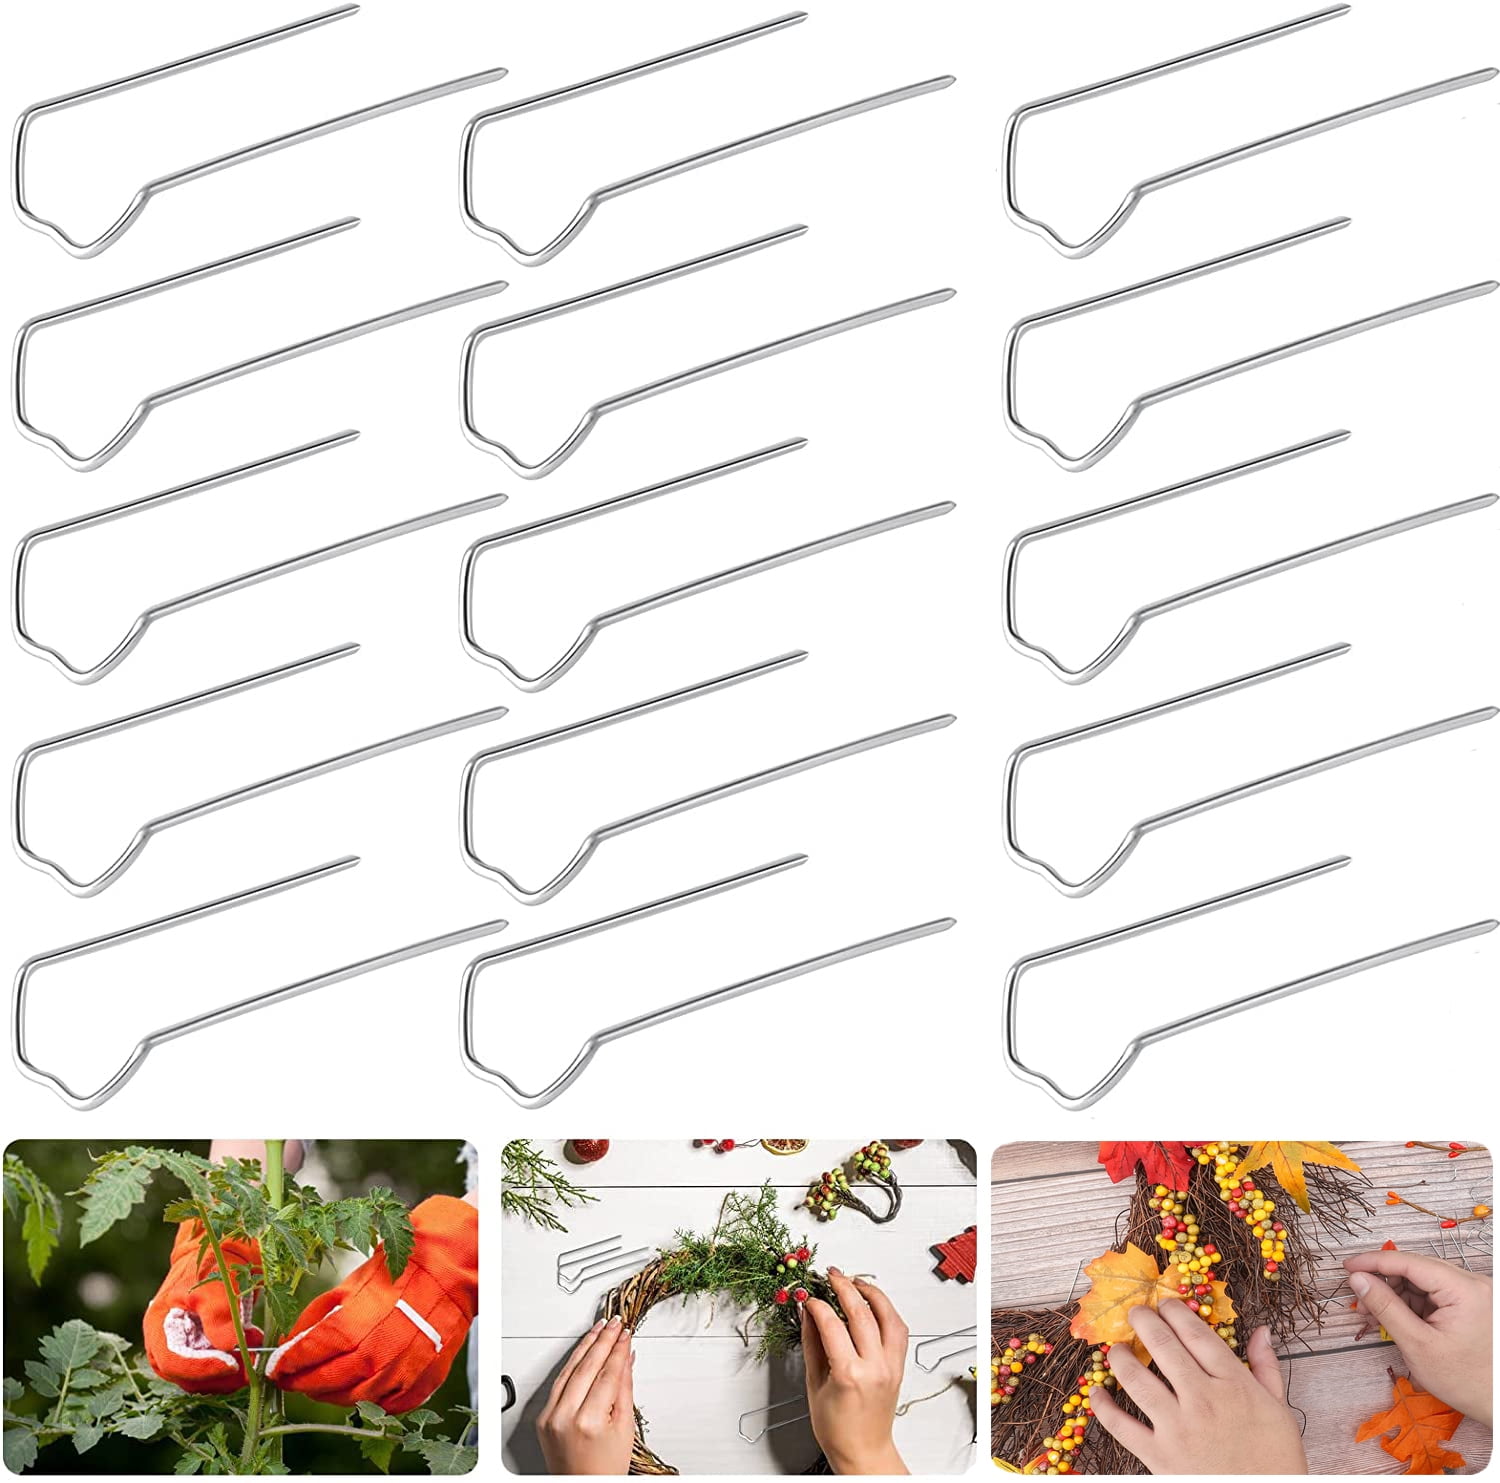 Uporstvo 300pcs Floral Pins,1.7 inch Greening Pins U-Shape Floral Fern Pins,for DIY Sewing Project,Straw Wreaths,Bouquet,Foam,Mother's Day Father's Day